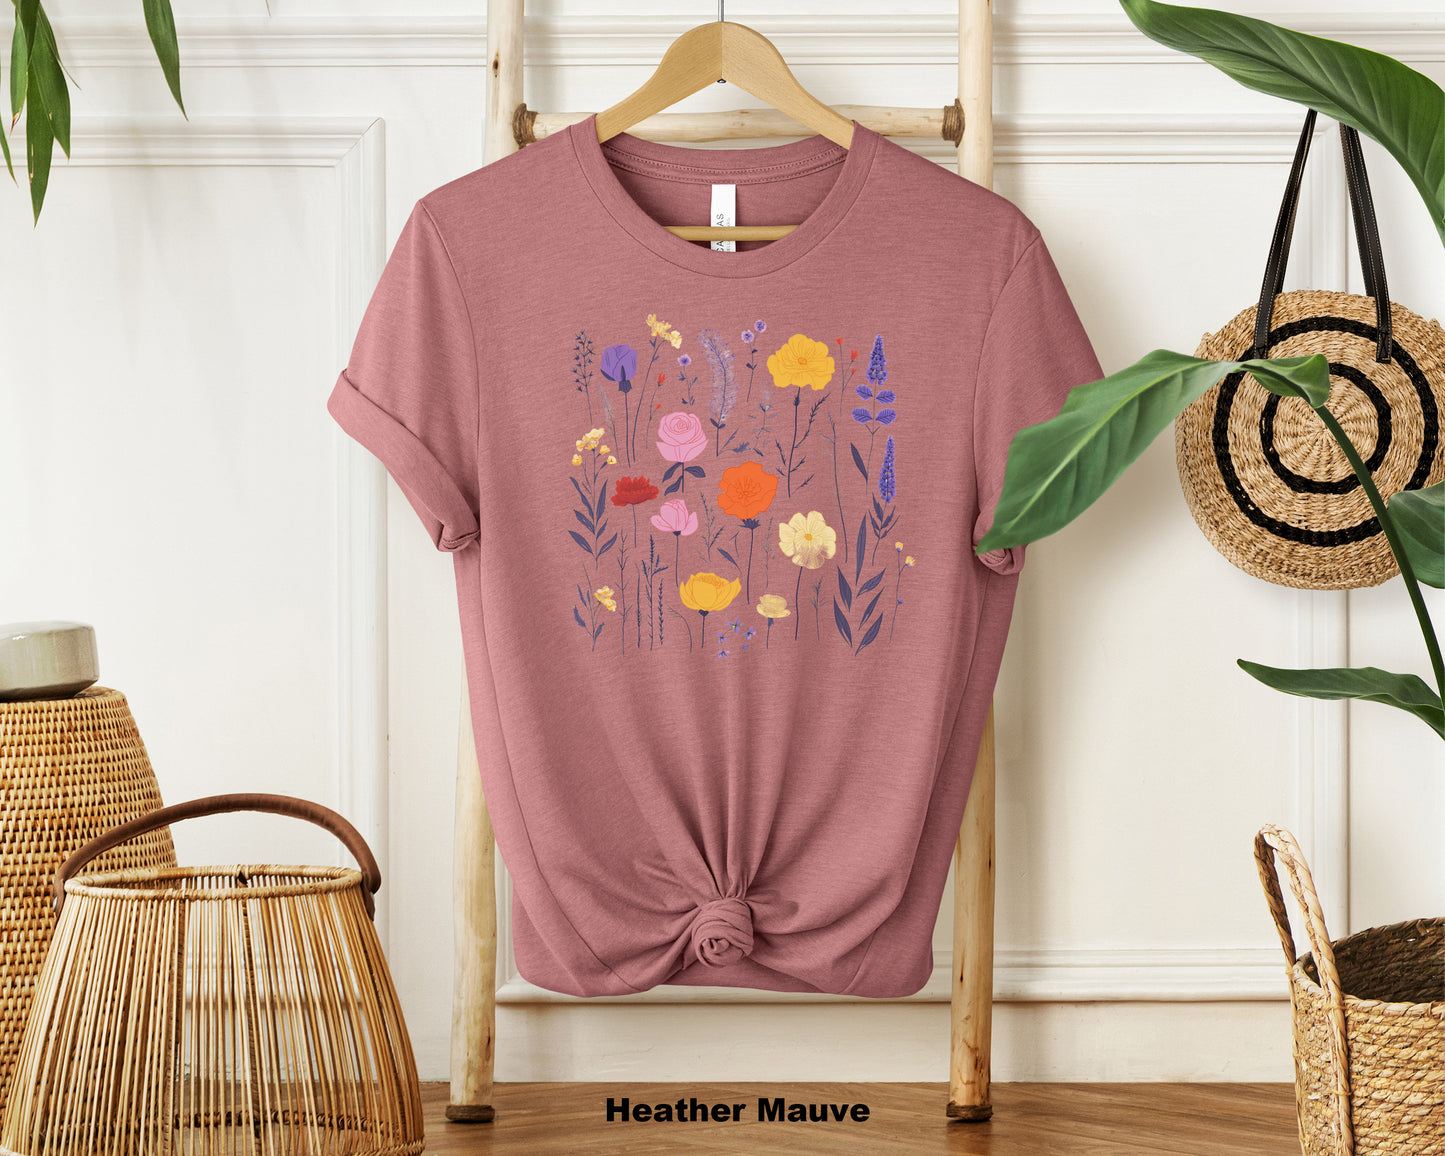 Whispering Meadows Neutral Floral Shirt - Women's Nature-Inspired Top